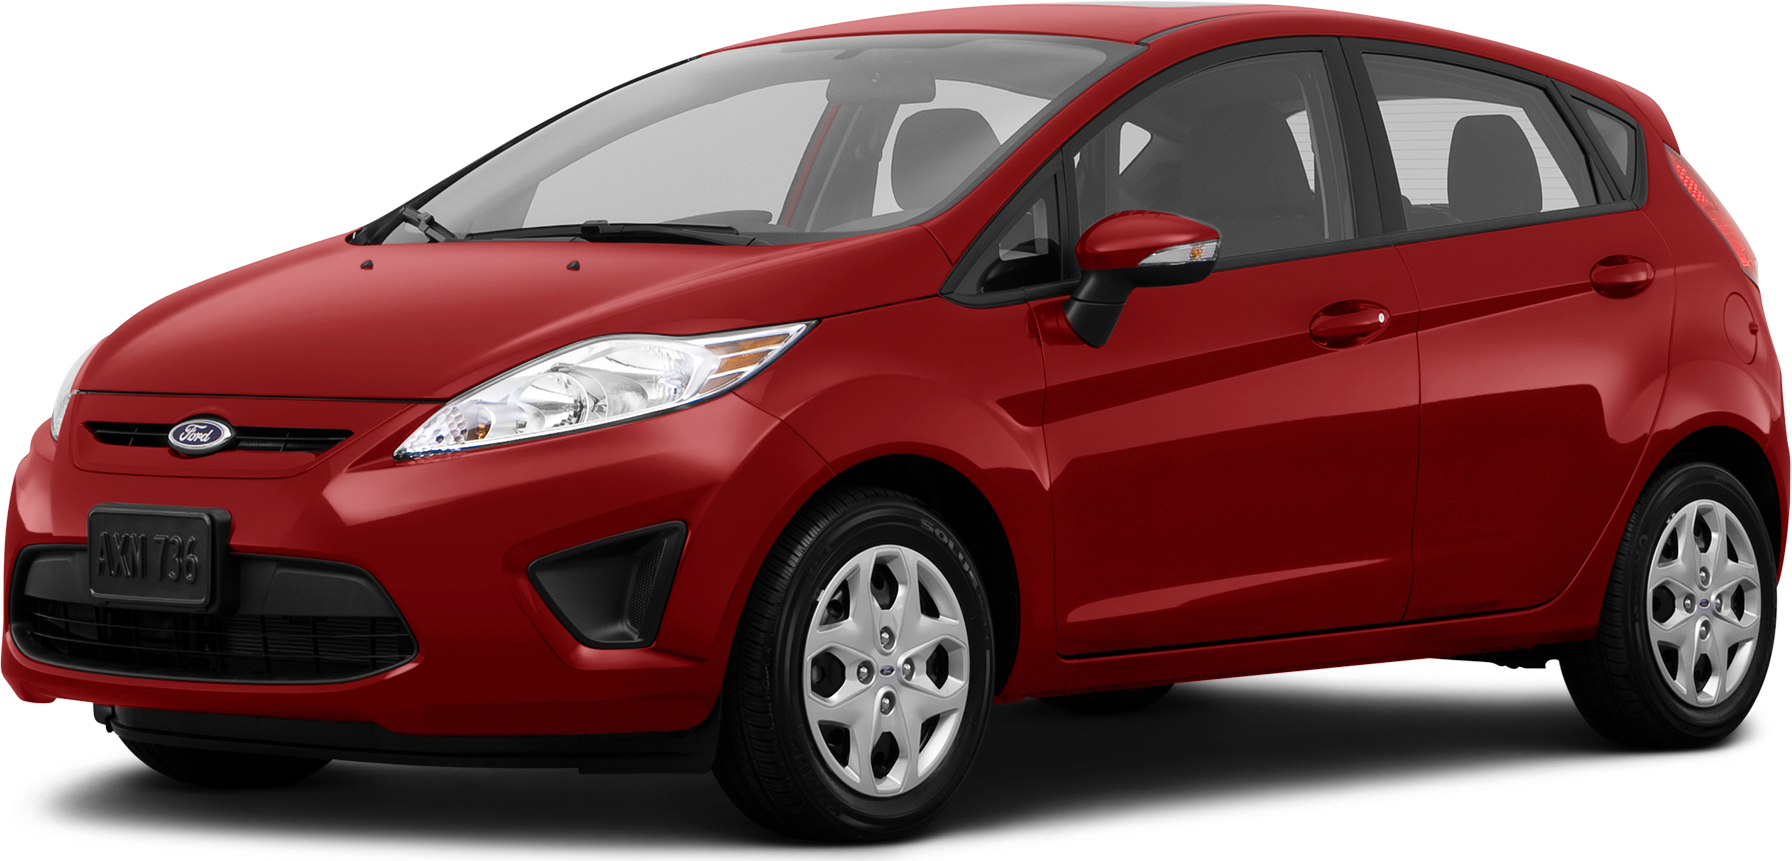 2013 Ford Fiesta Price Value Ratings And Reviews Kelley Blue Book